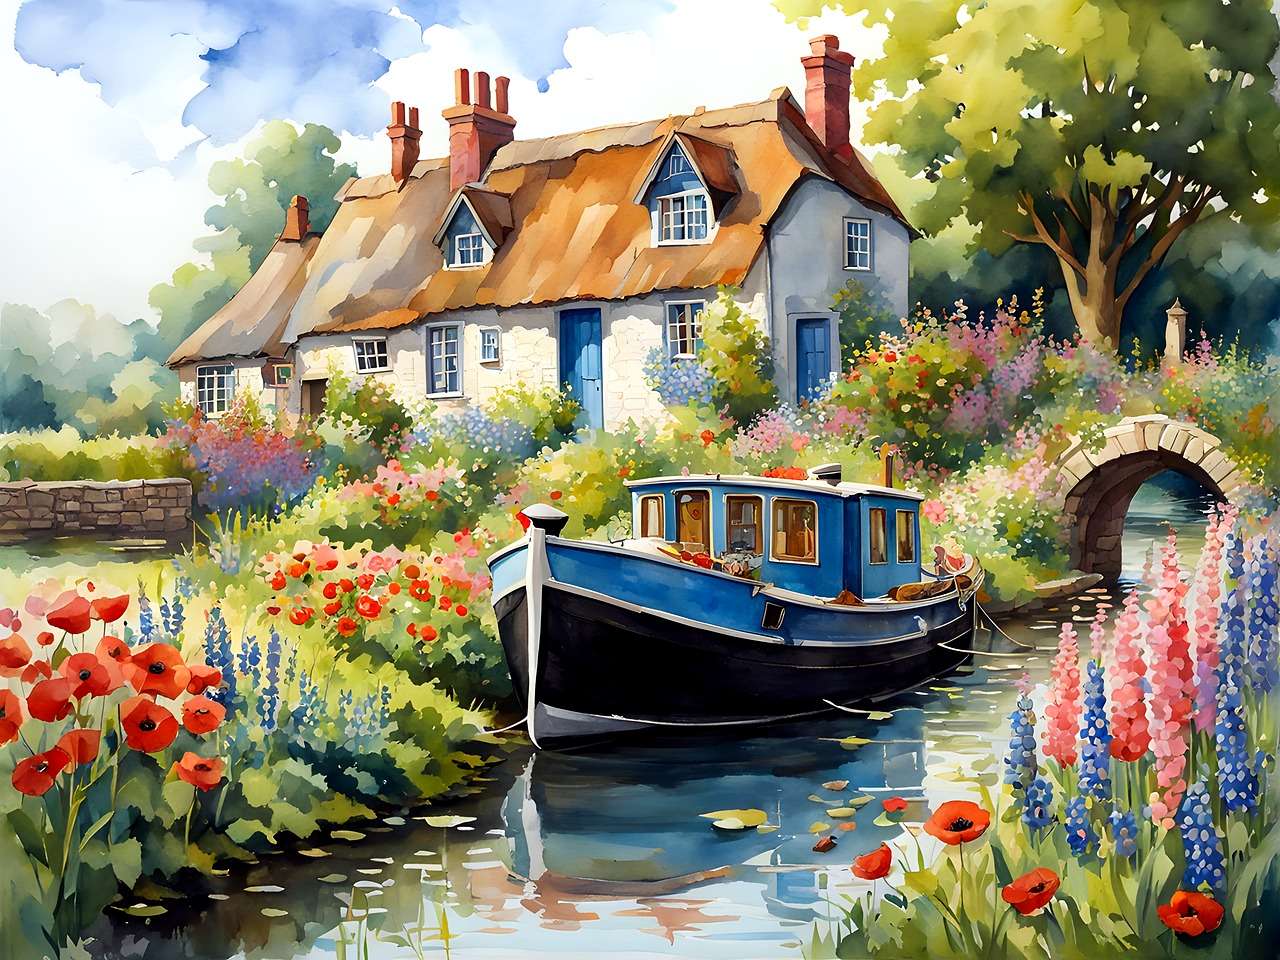 Thatched roof house on the canal puzzle online from photo